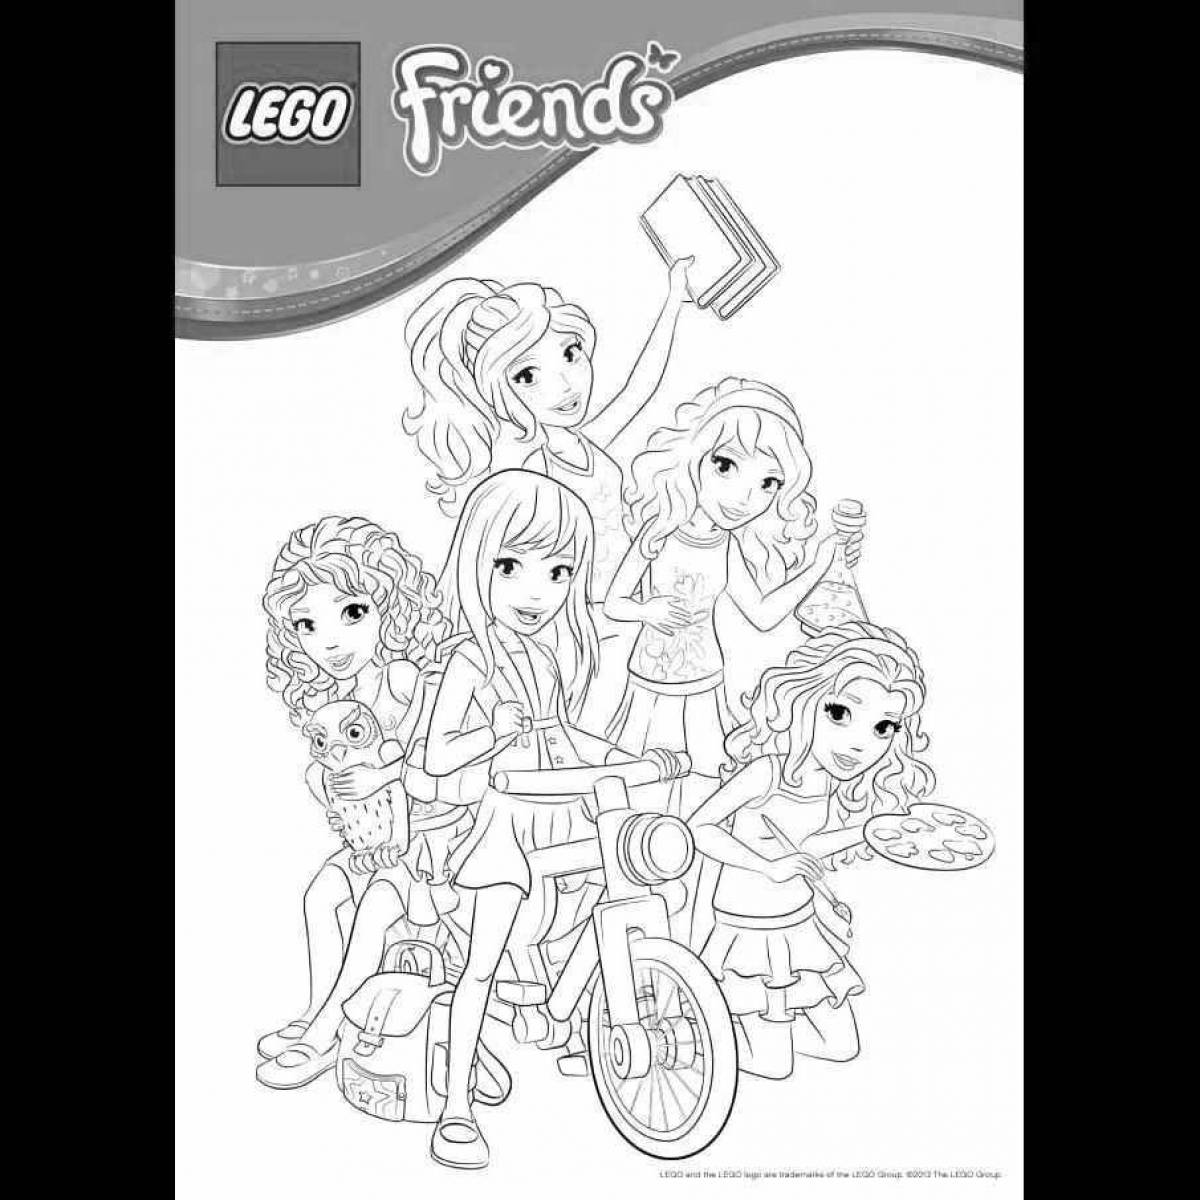 Fun coloring page turn on for girls